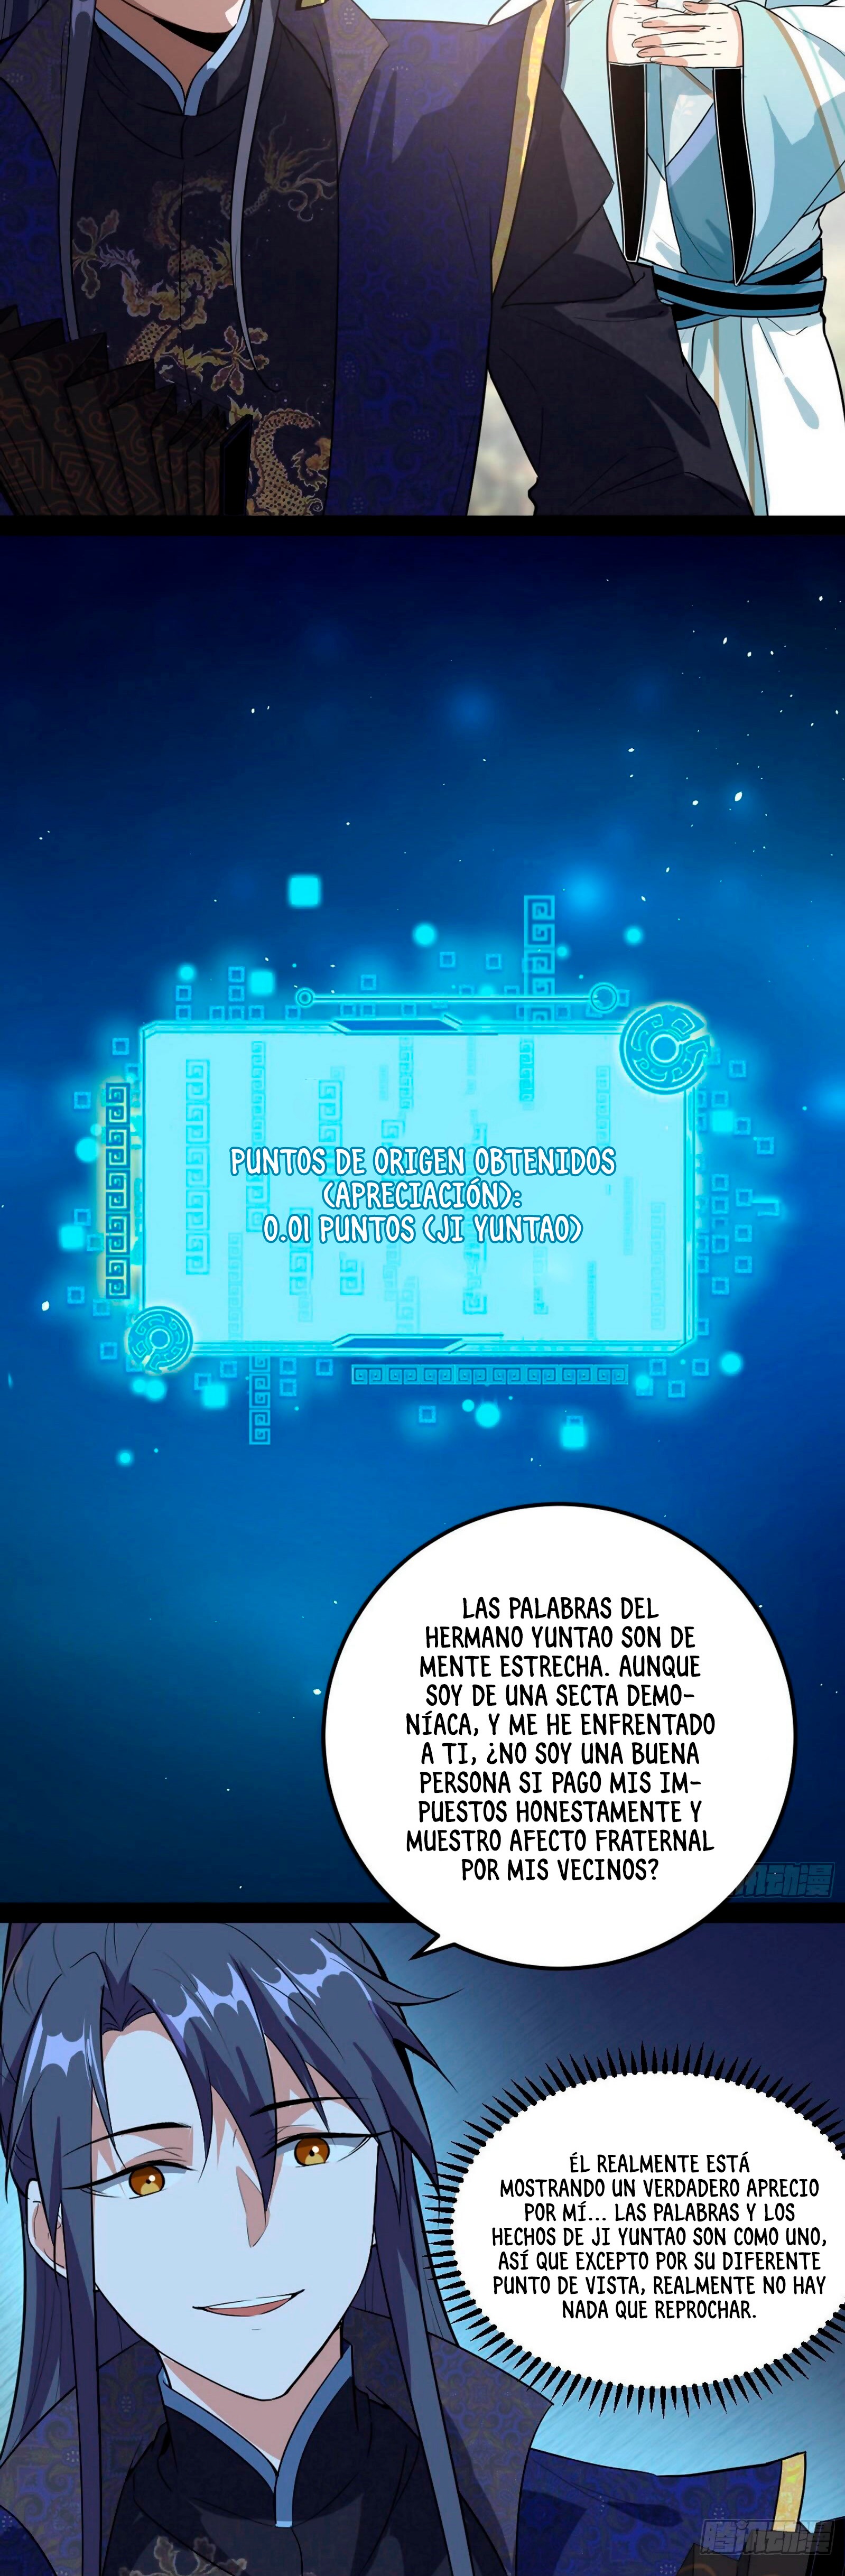 Manga Soy un dios maligno Chapter 81 image number 23